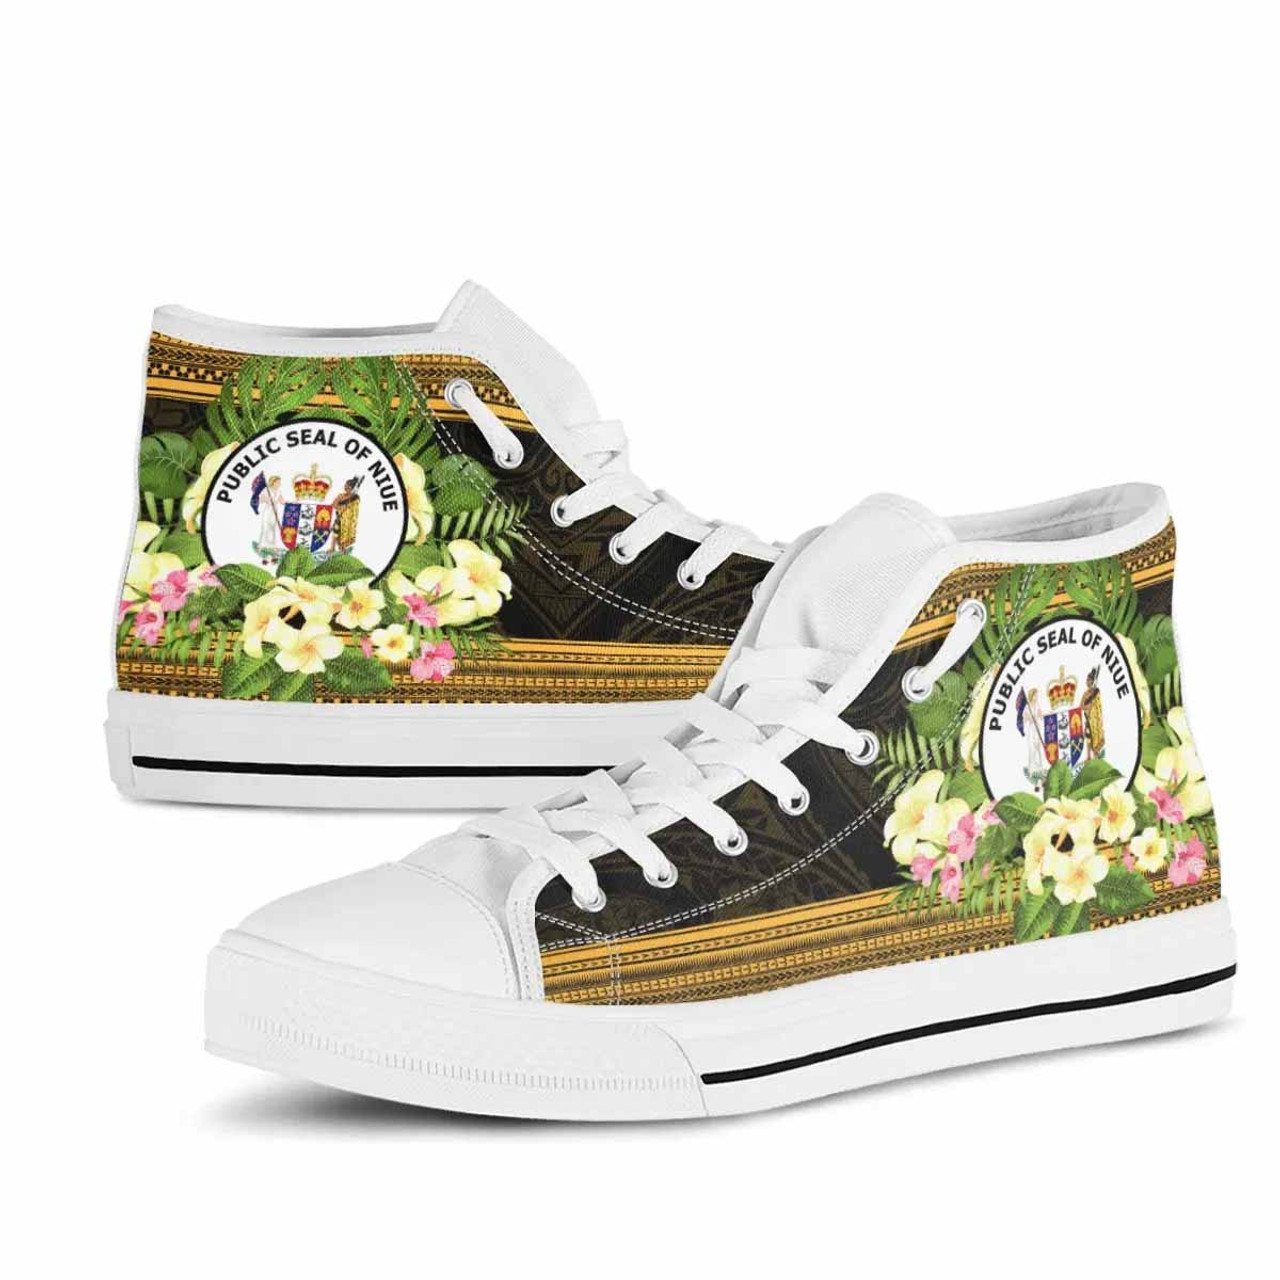 Niue High Top Shoes - Polynesian Gold Patterns Collection 10